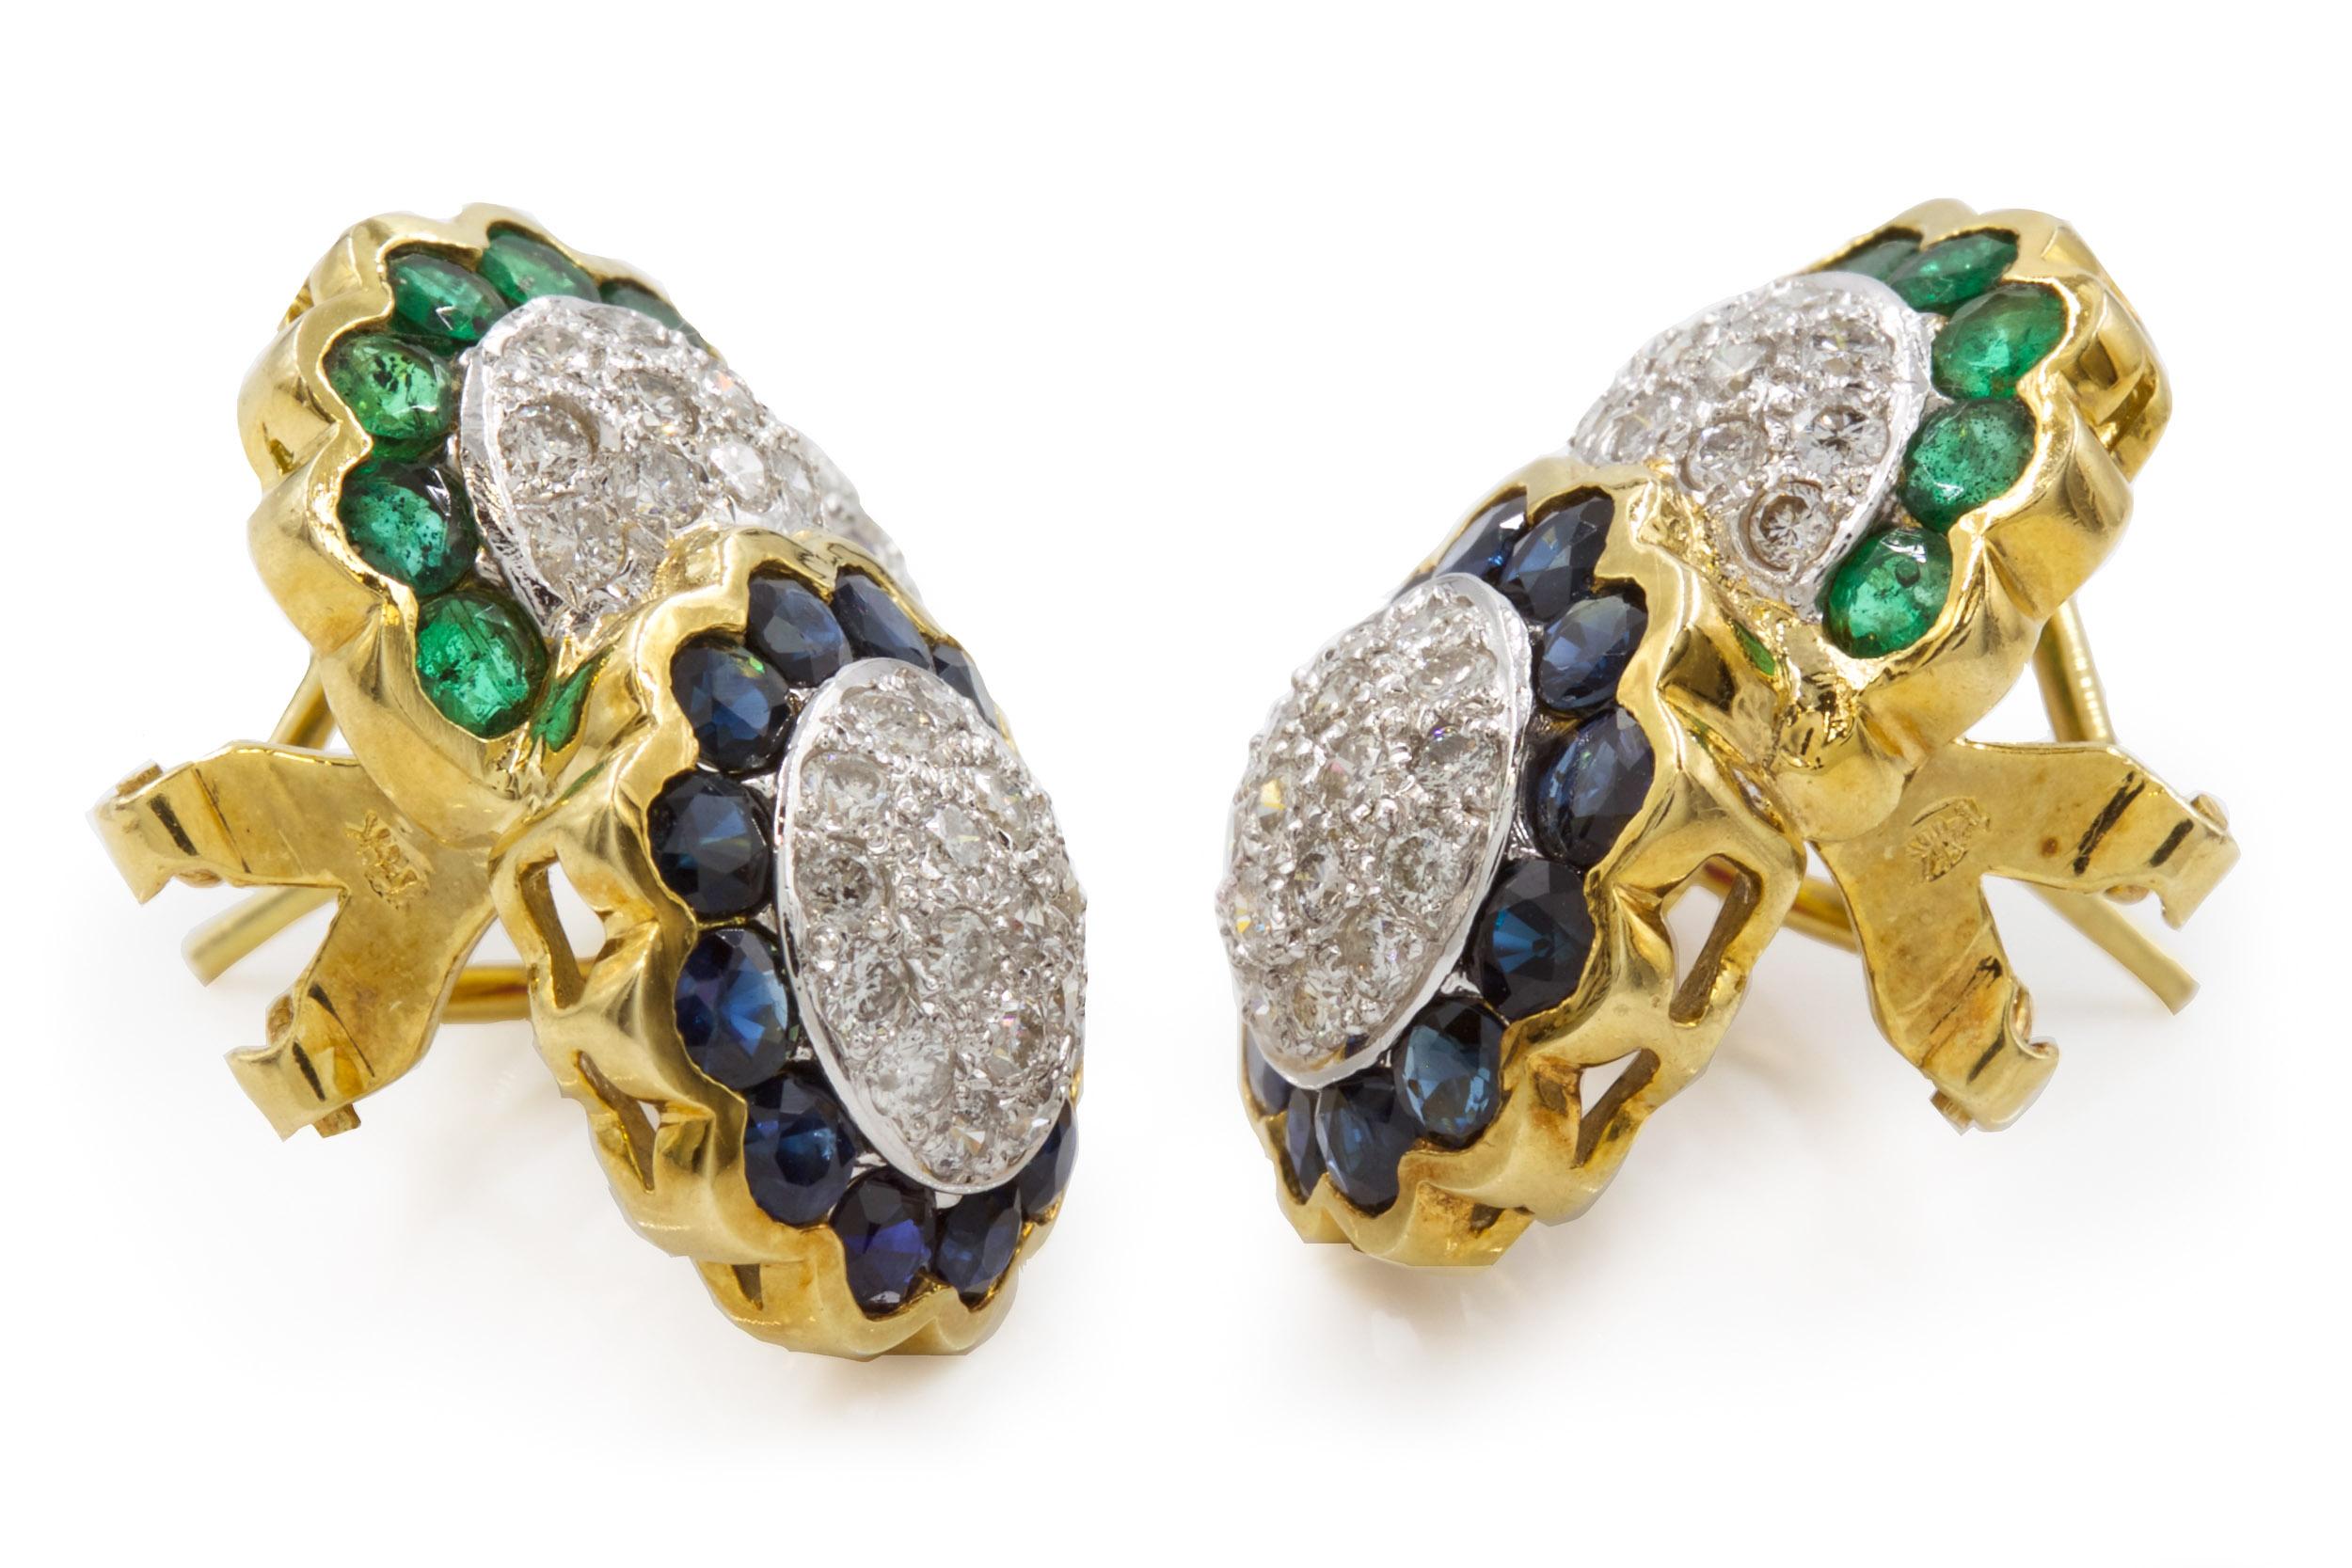 VINTAGE 14K GOLD, DIAMOND, EMERALD, RUBY AND SAPPHIRE EARRINGS
Circa third quarter of 20th century; with omega-style clips
Item # C104236 

An absolutely gorgeous vintage pair of earrings executed entirely in 14 karat yellow gold, they are set with